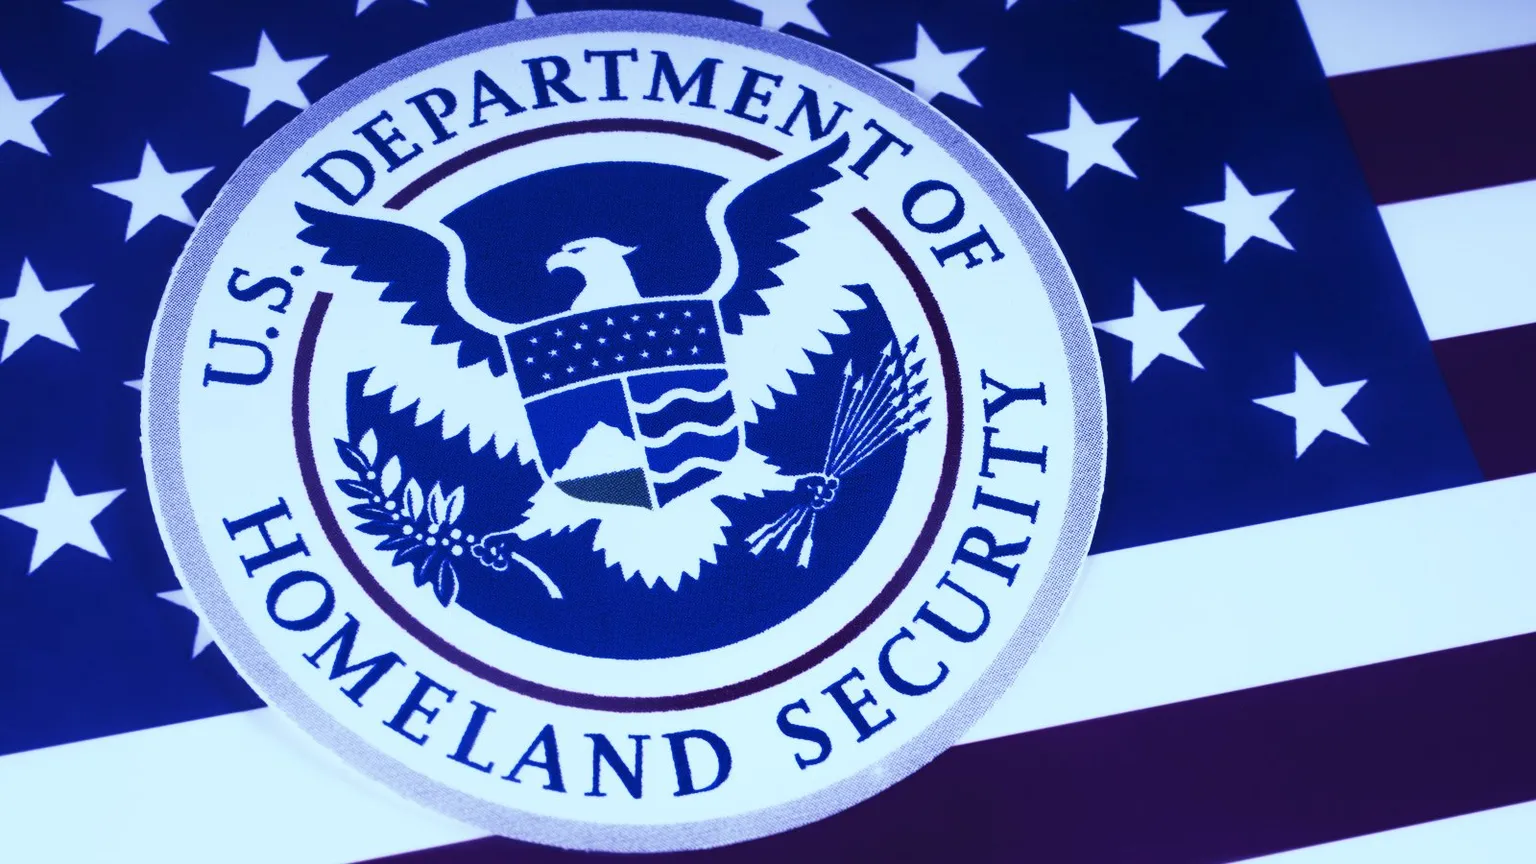 The US Department of Homeland Security. Image: Shutterstock